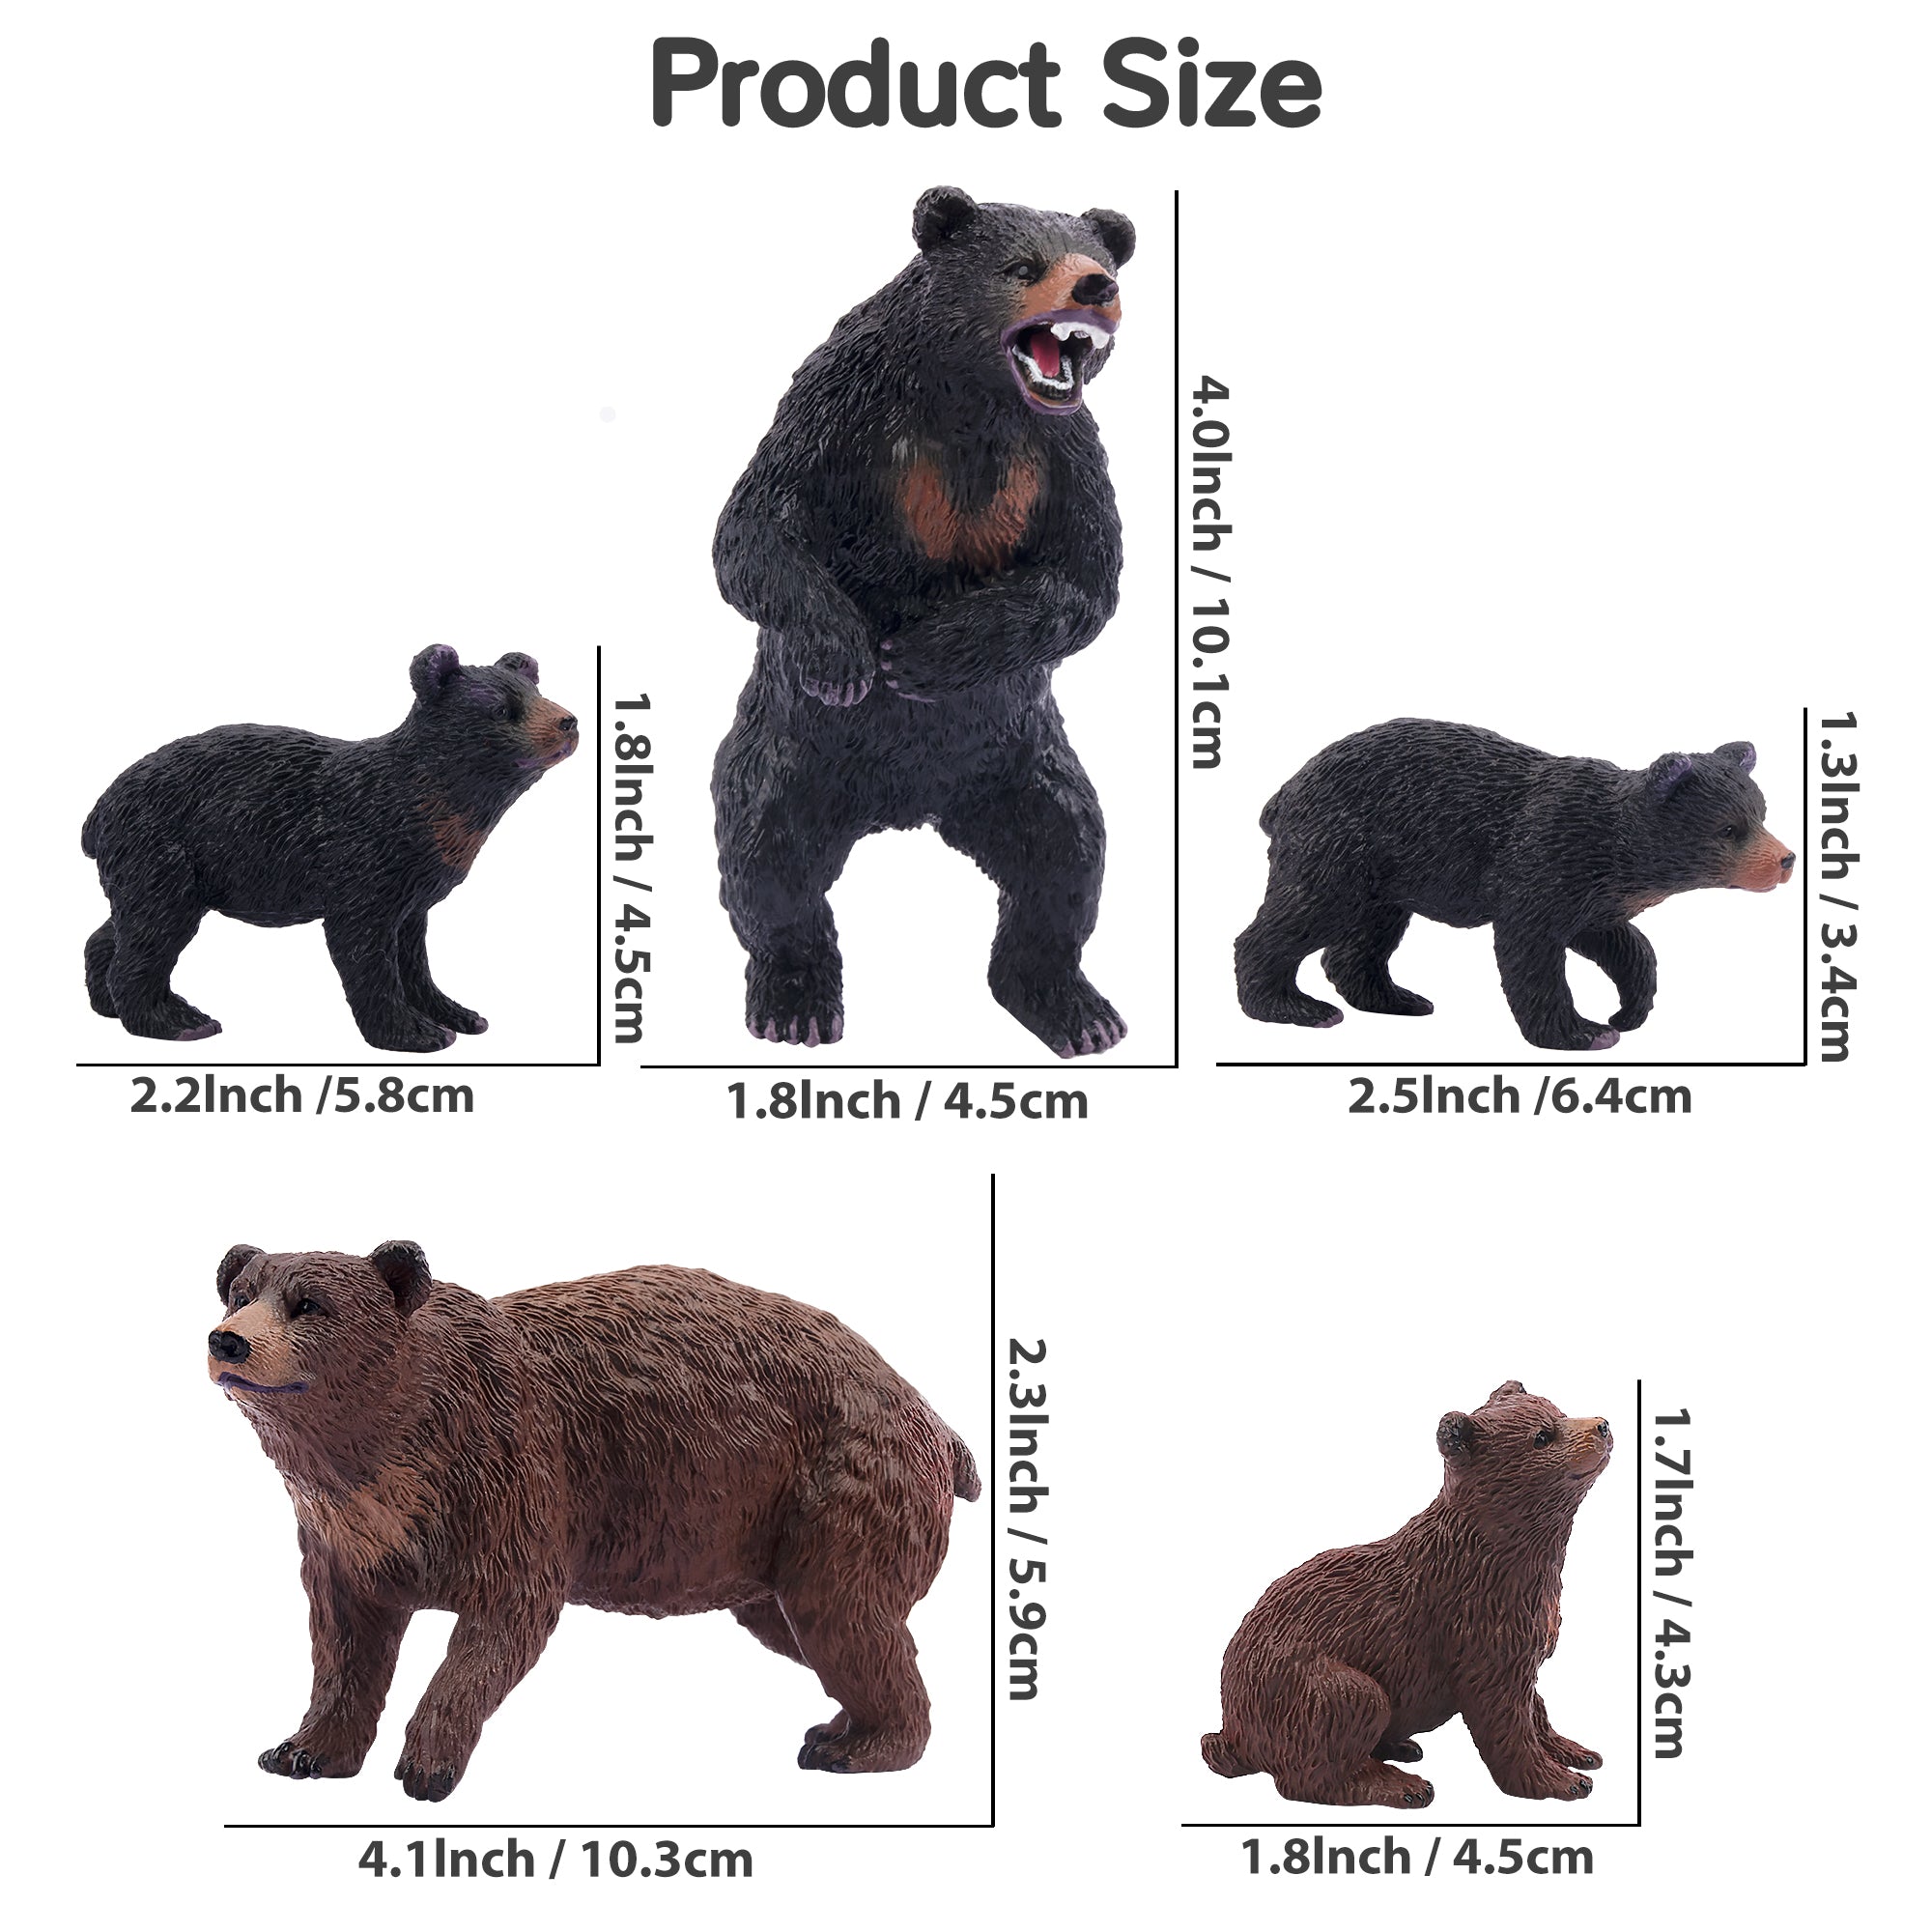 6-Piece Bear Figurines Playset with Brown & Black Bears-size